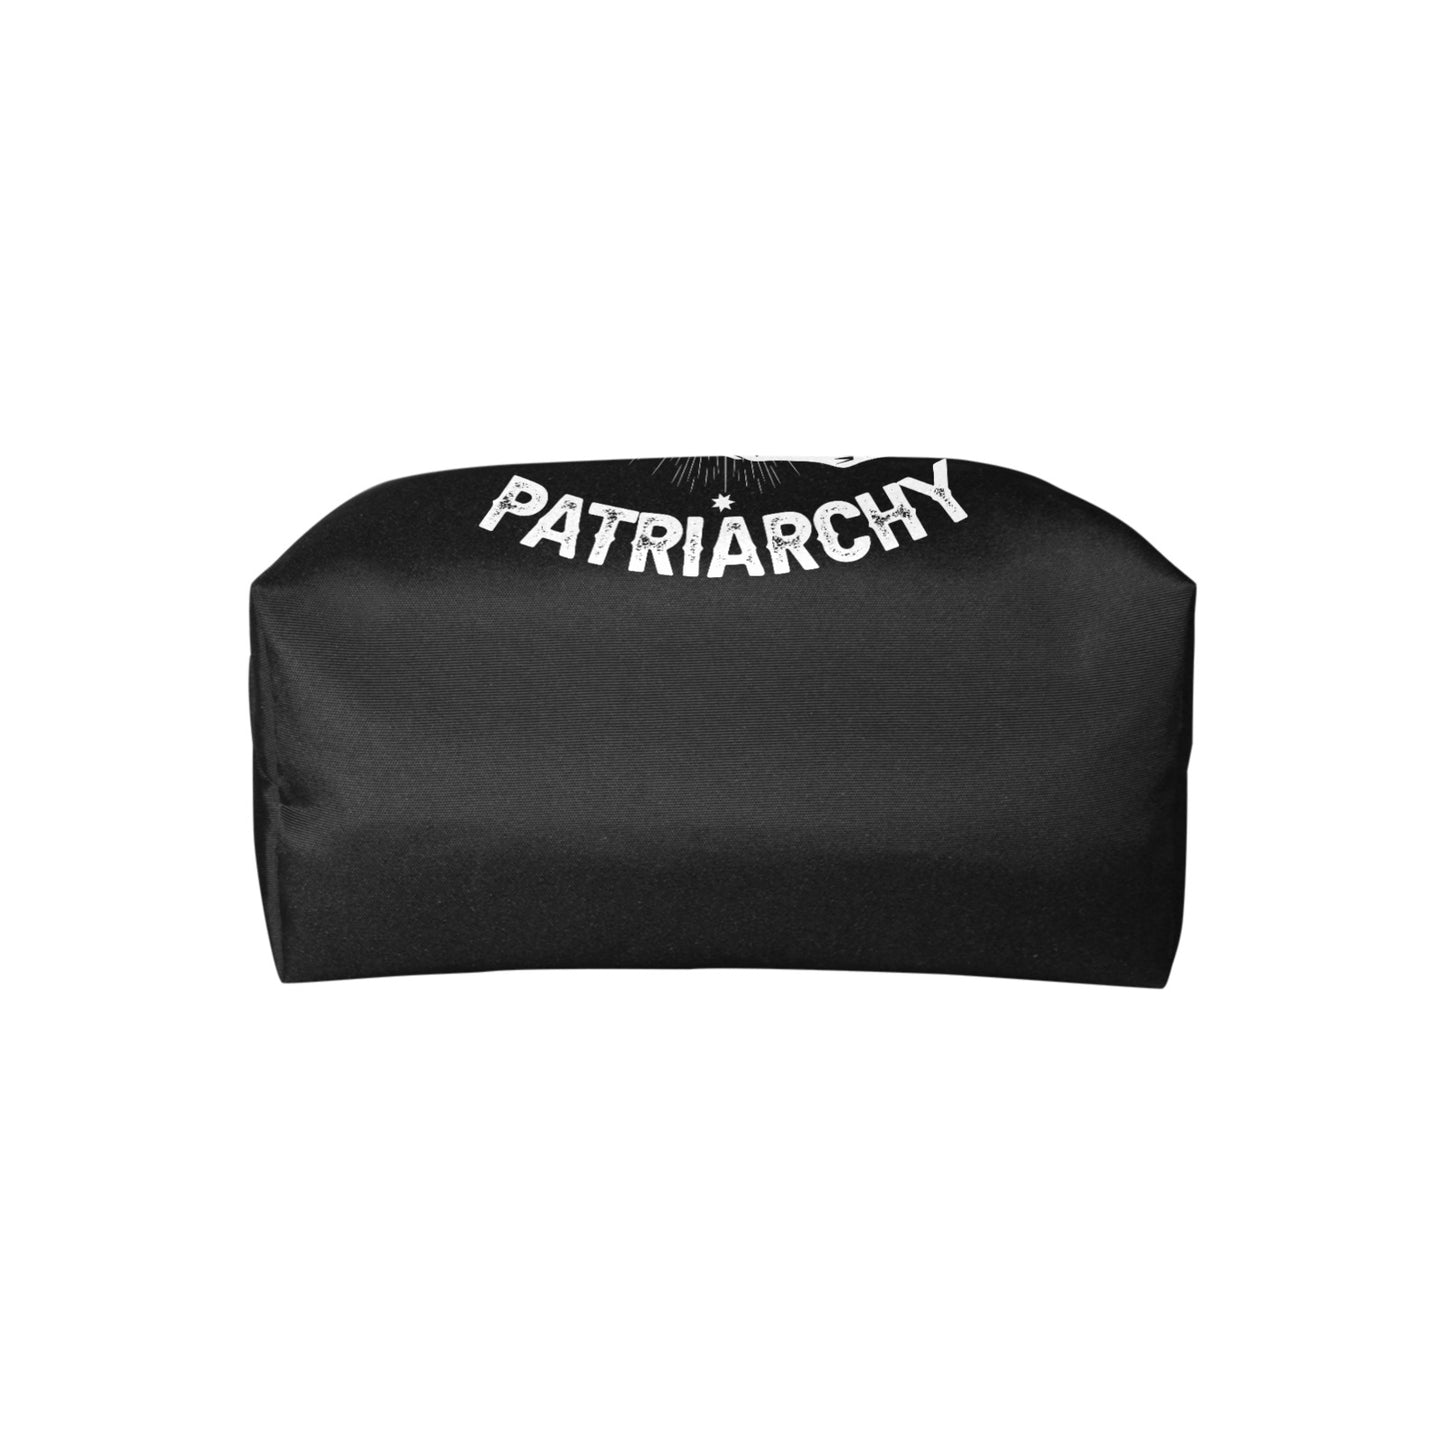 HEX the patriarchy Feminist Witch zip tote Women's Classic Handbag